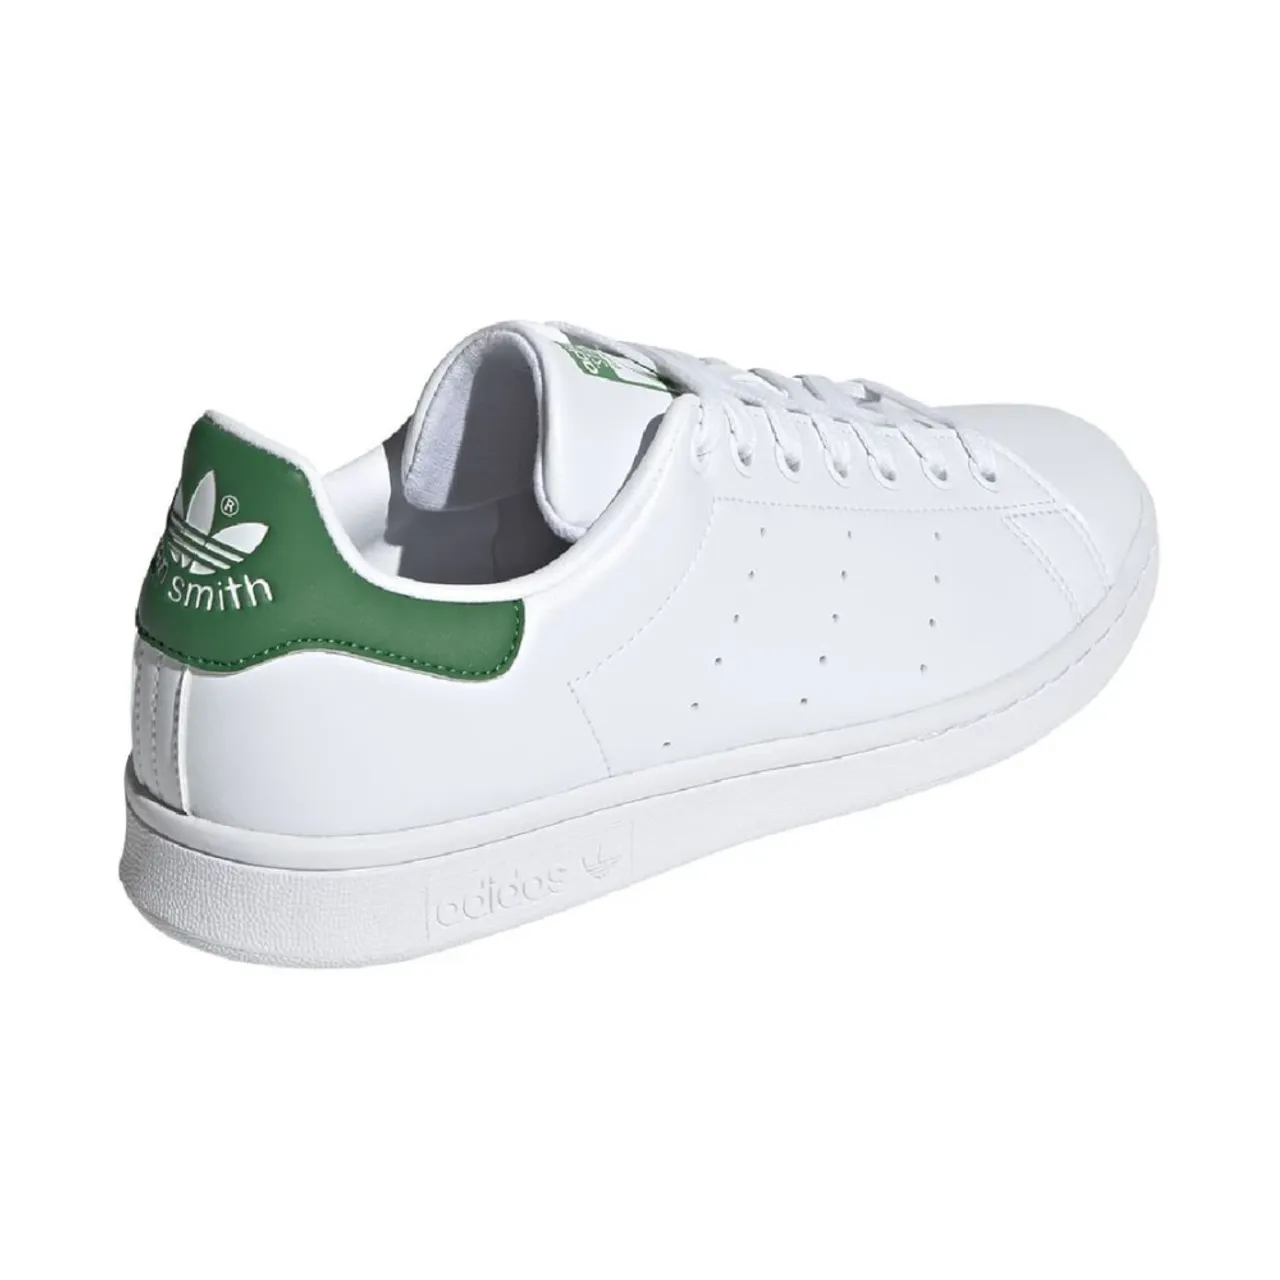 Adidas Originals , White Leather Green Insert Sneakers ,White male, Sizes: